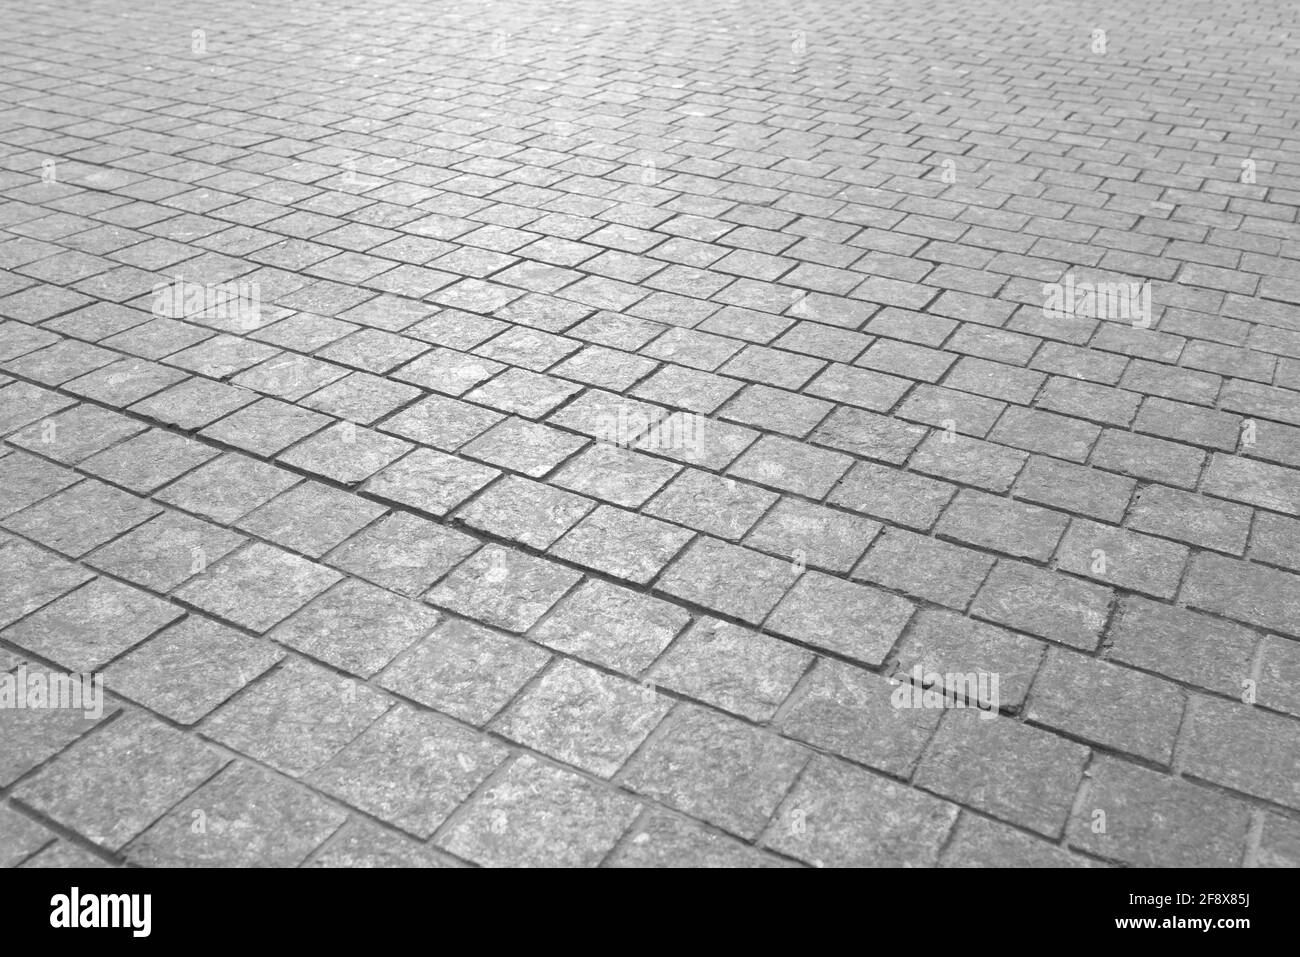 Paving stones road texture black and white. Road and square area surface. Stock Photo